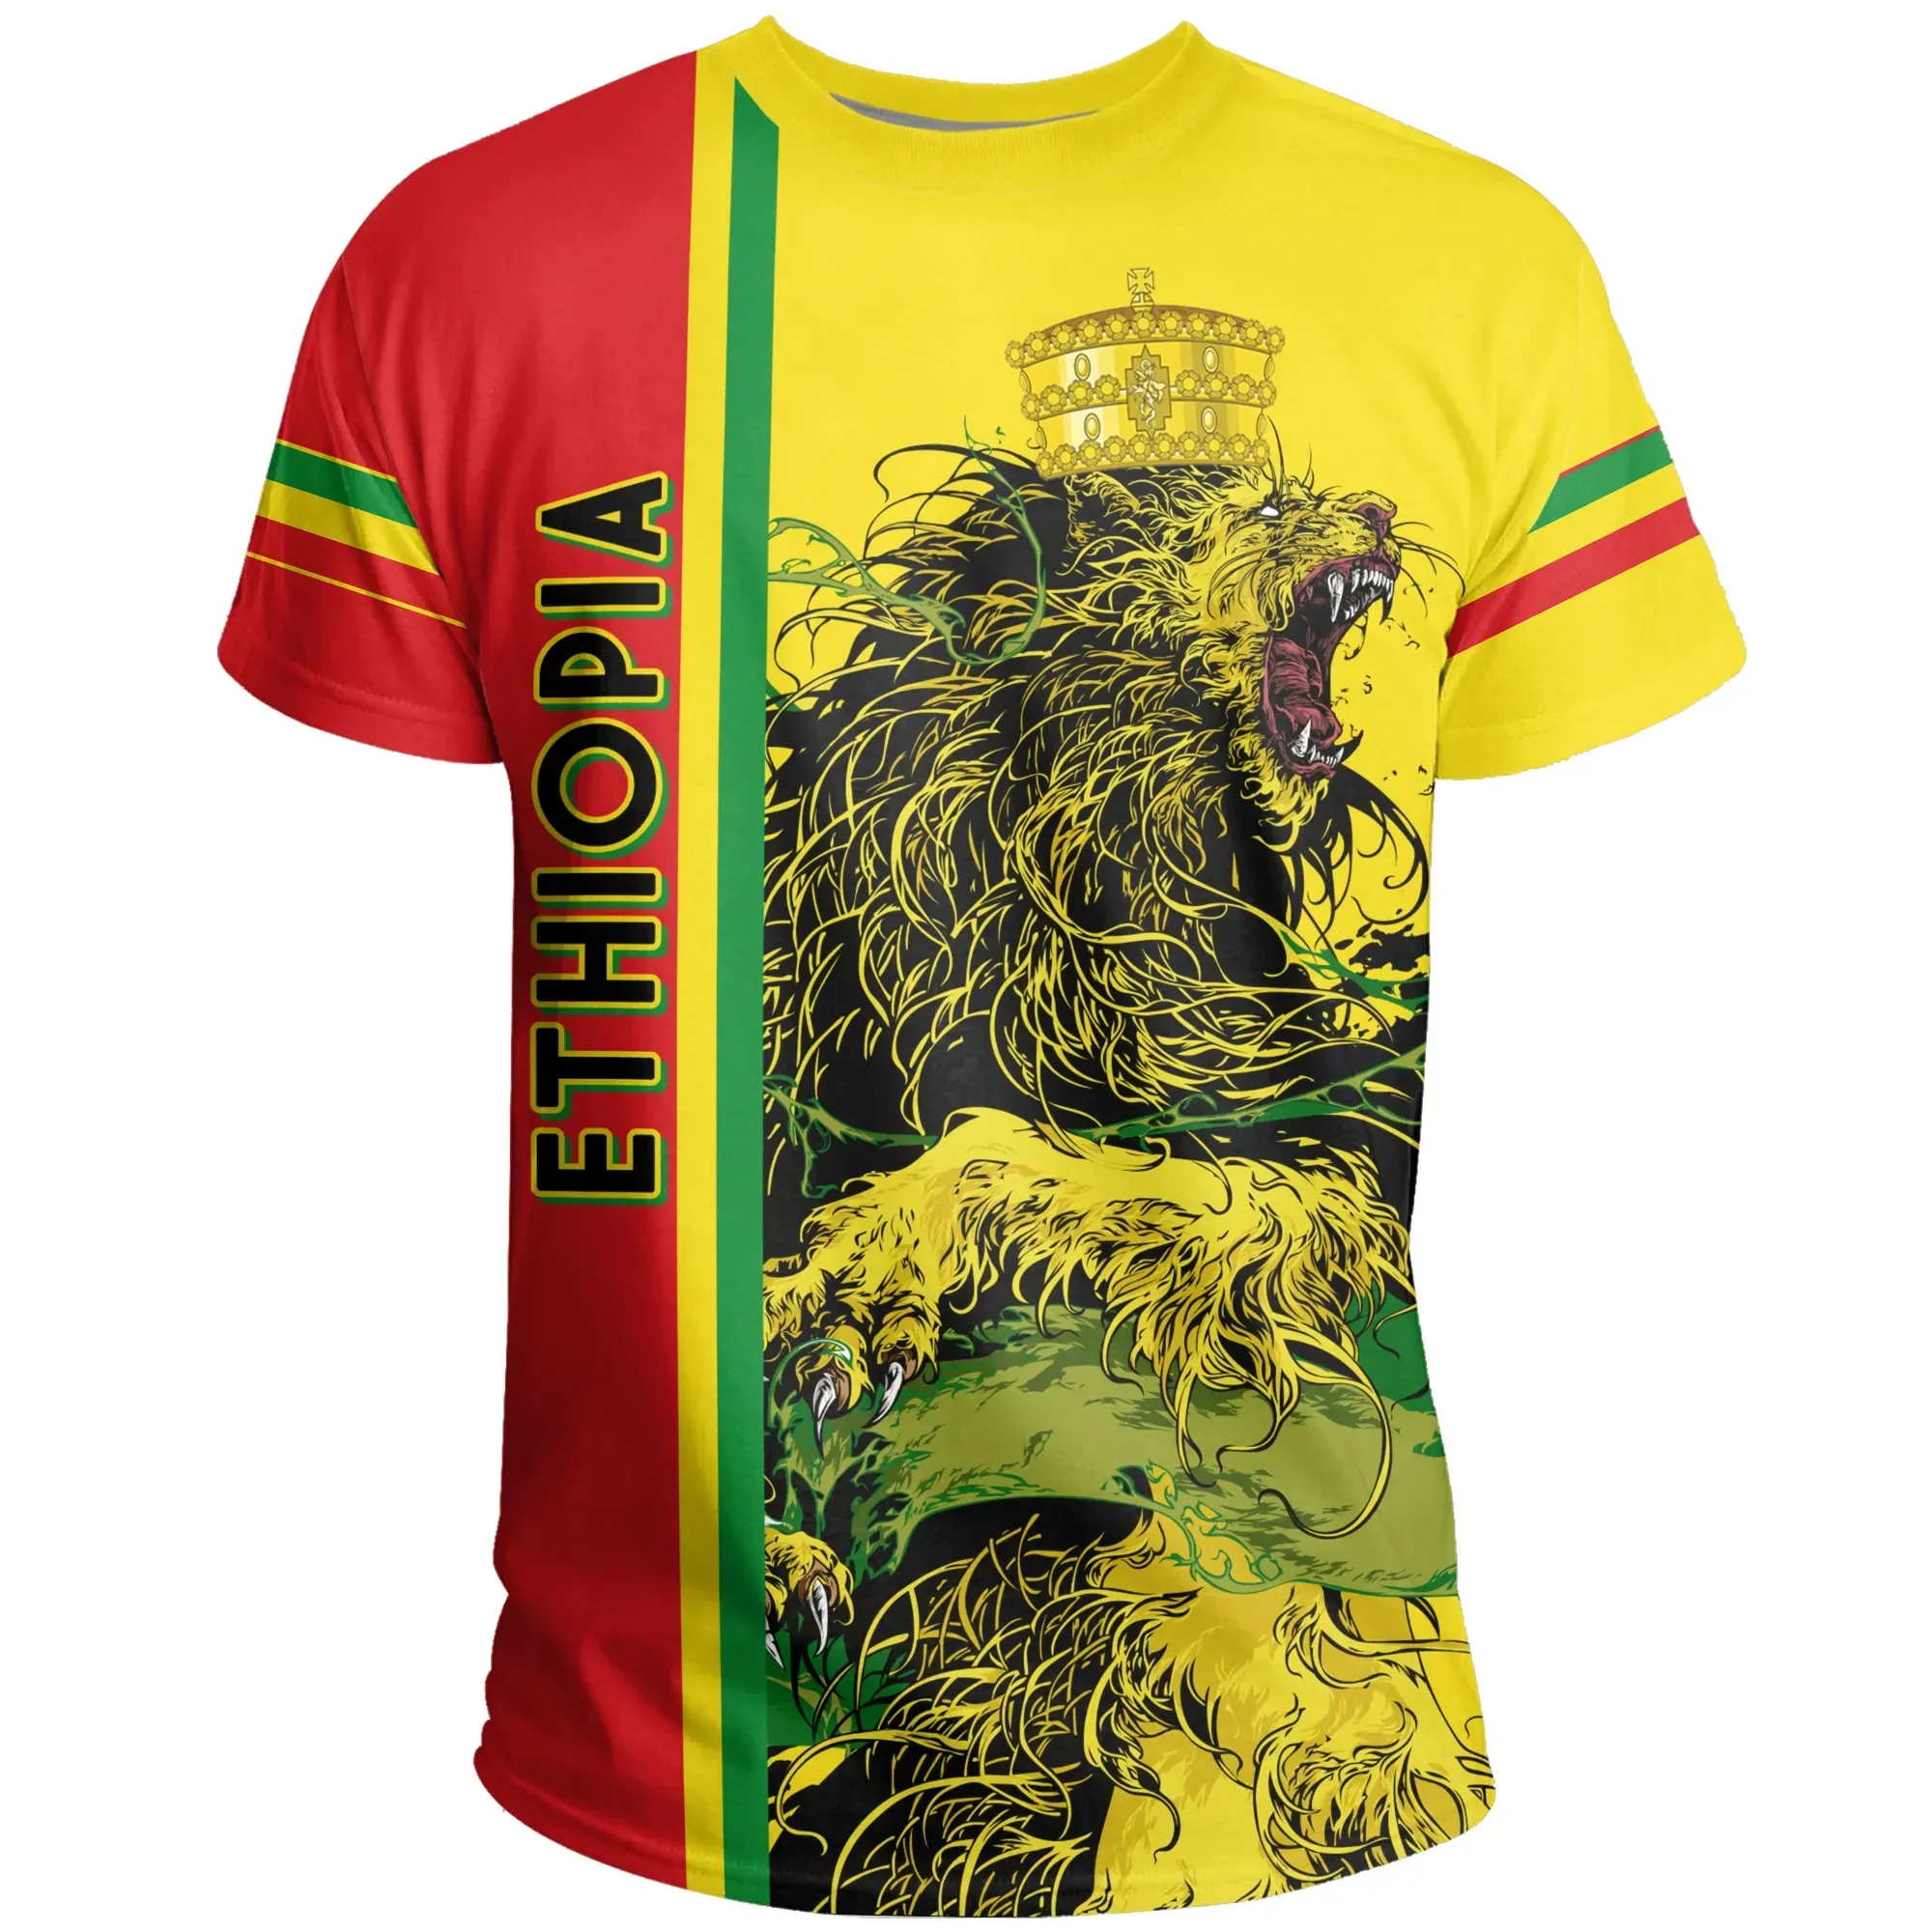 African T-shirt – Medgar Evers Black History Month Tee